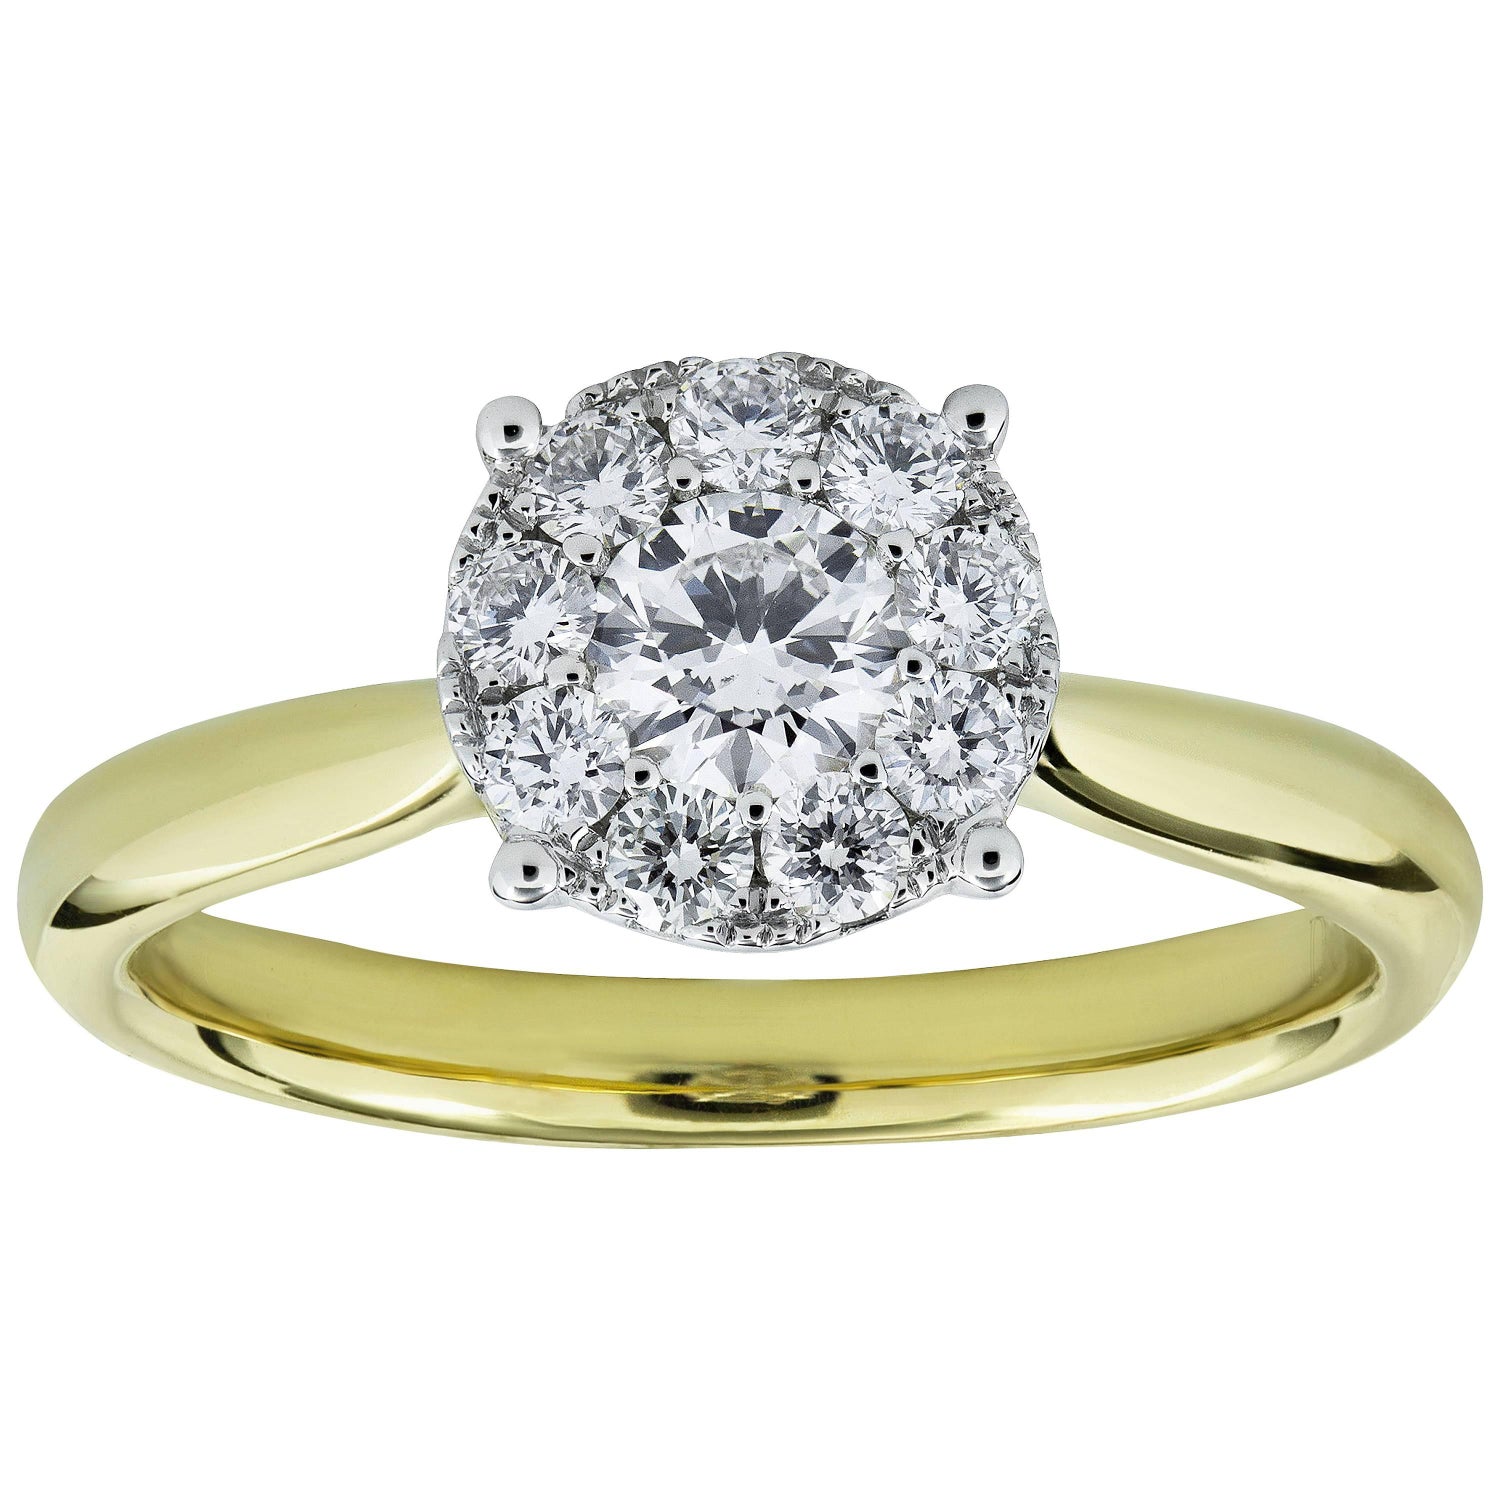 Brilliant 2 Ct Round Cut Diamond Cluster Engagement Ring 14K Yellow Gold Fn